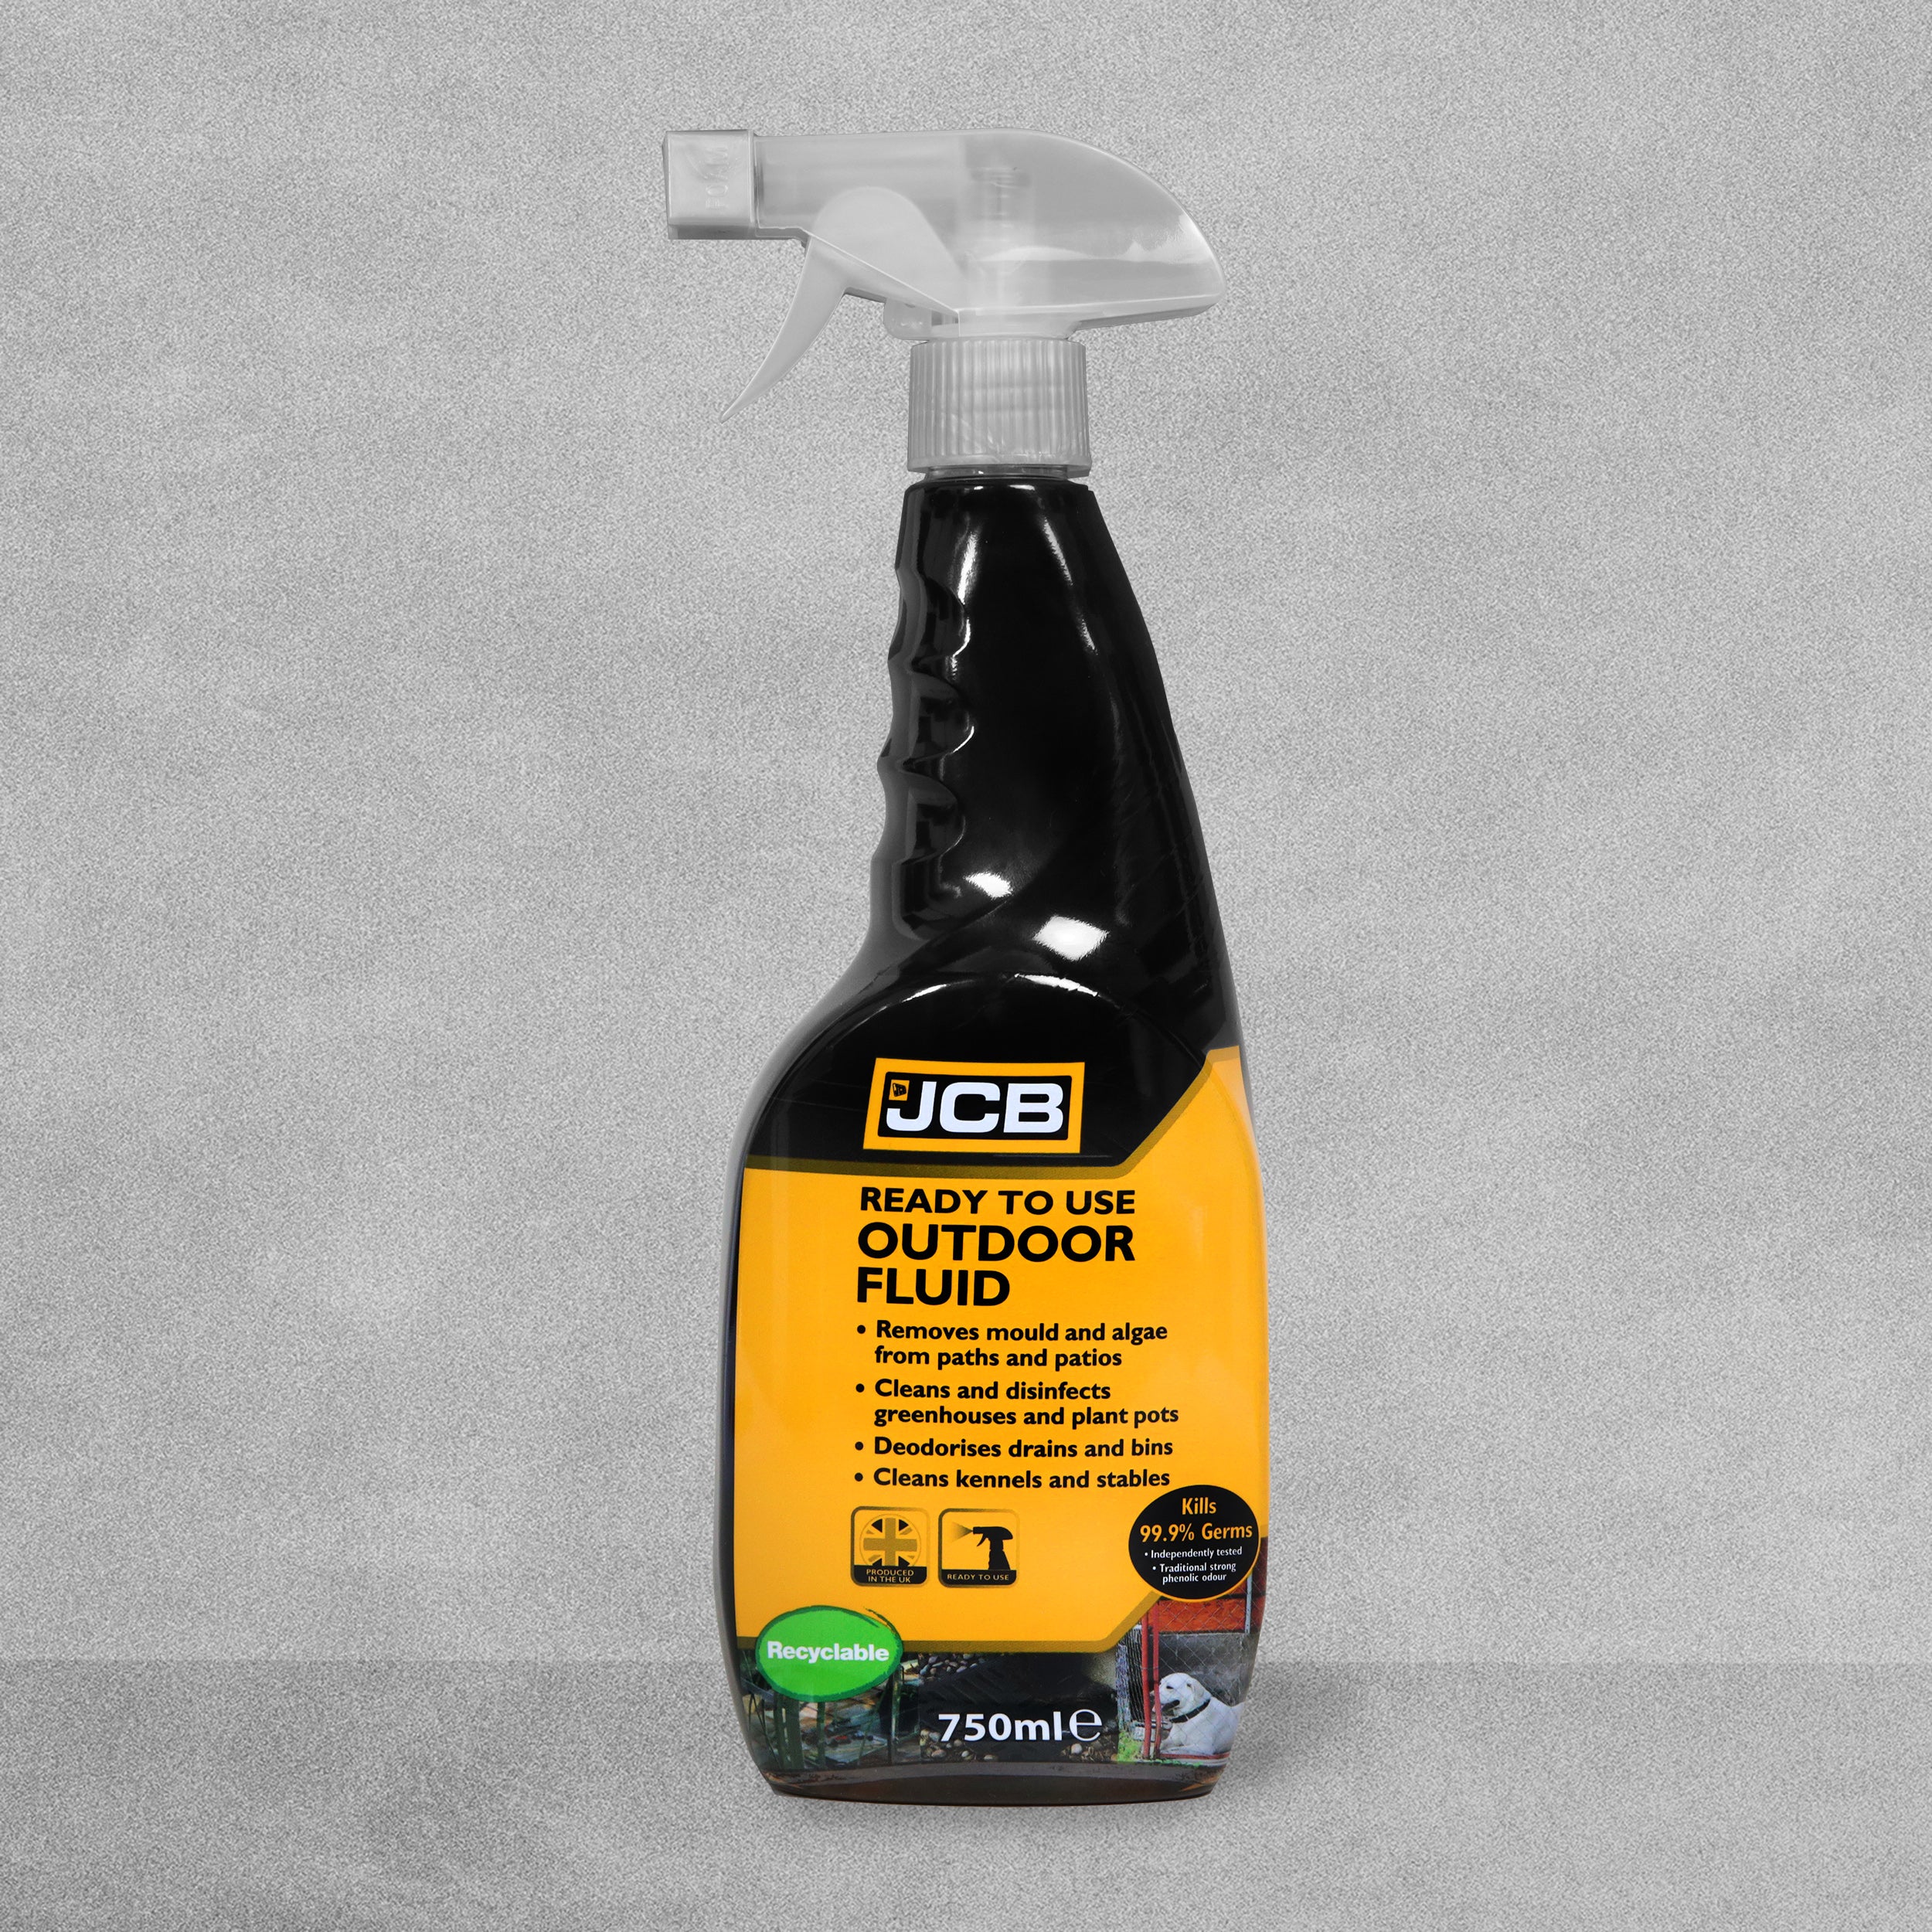 JCB Outdoor Fluid Ready to Use - 750ml